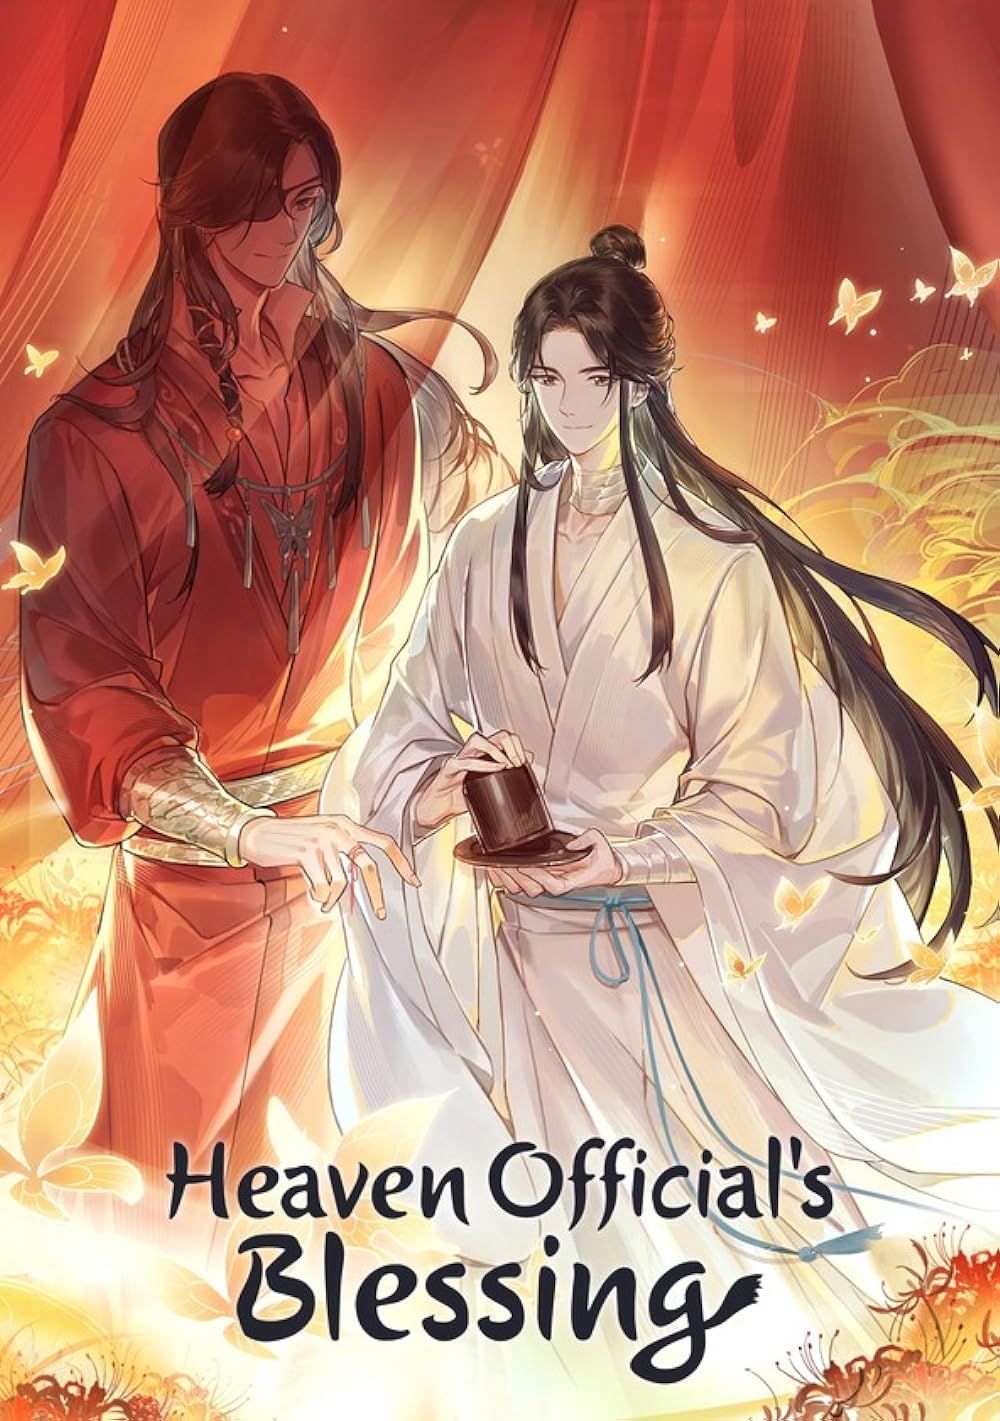 Hua Cheng and Xie Lian in the Heaven Official's Blessing Promo